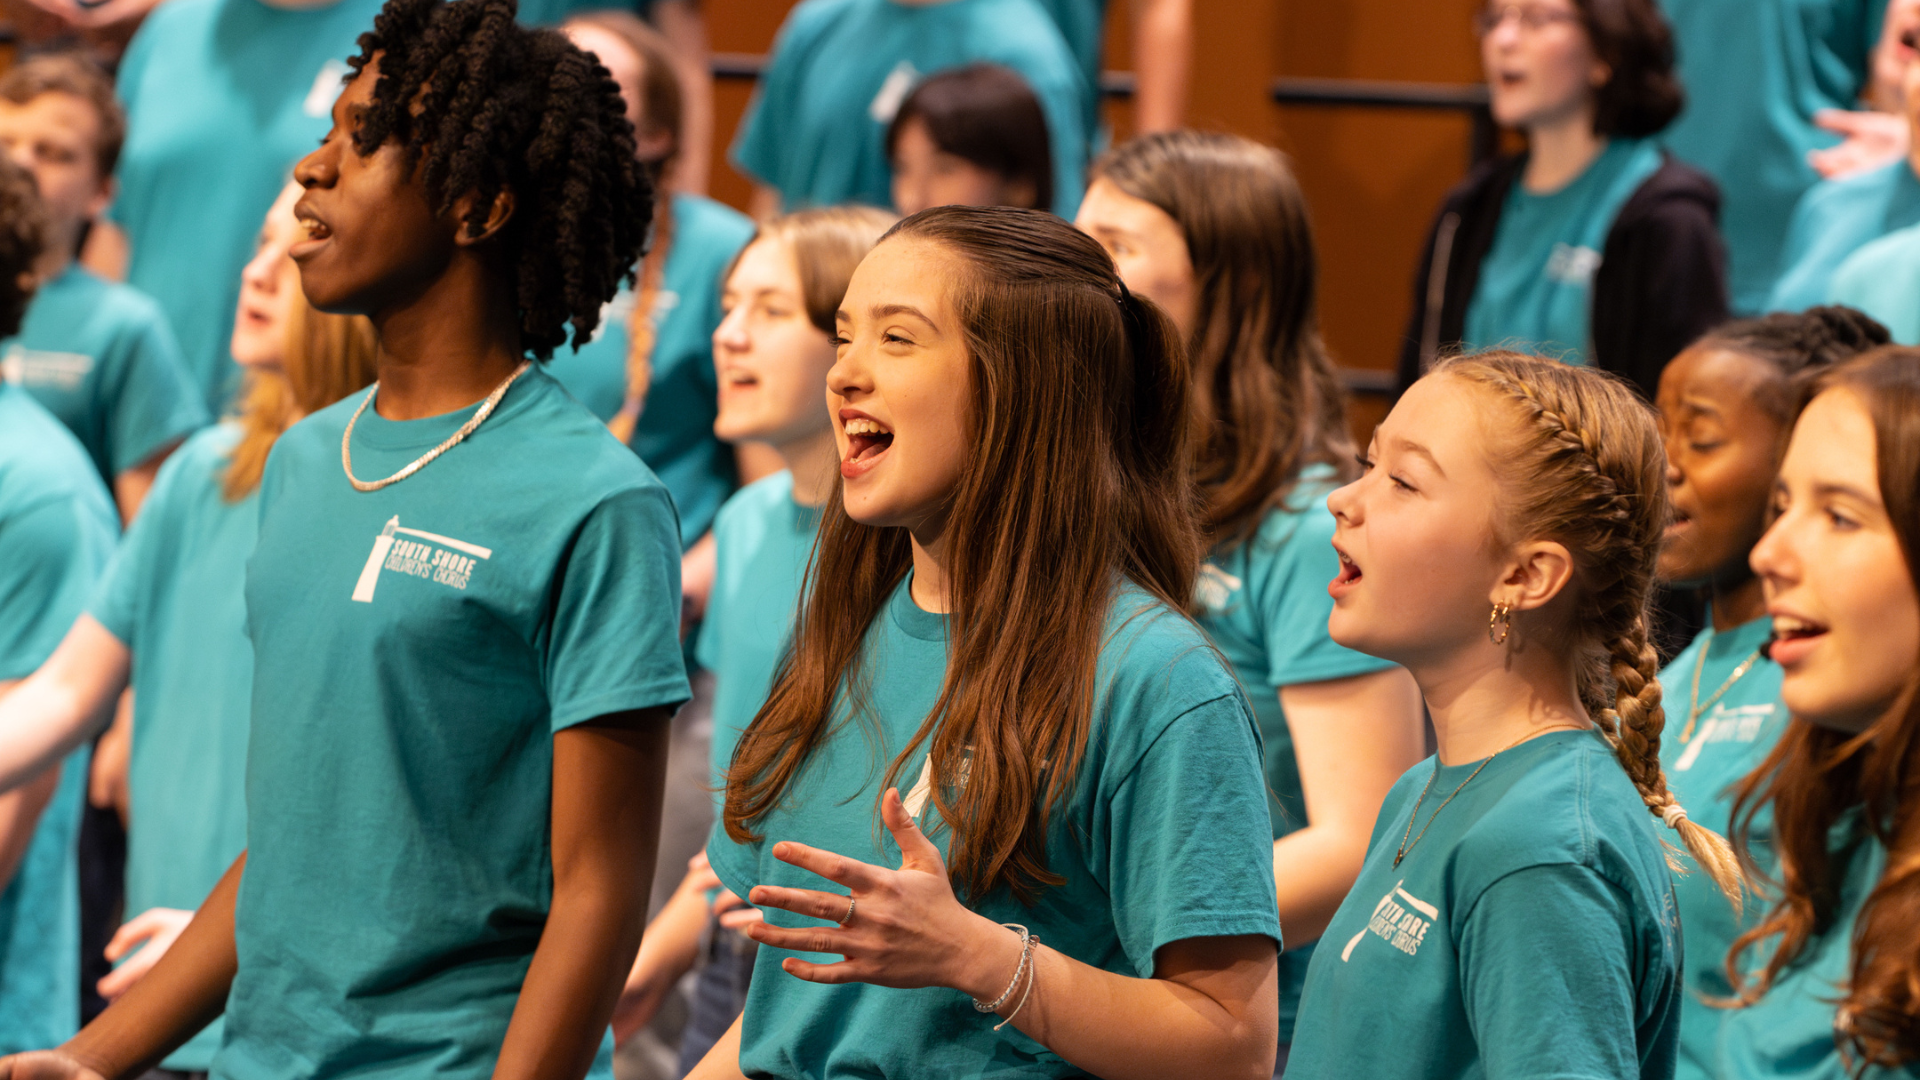 A diverse group of youth smile as they sing in a choir while wearing matching green T-shirts